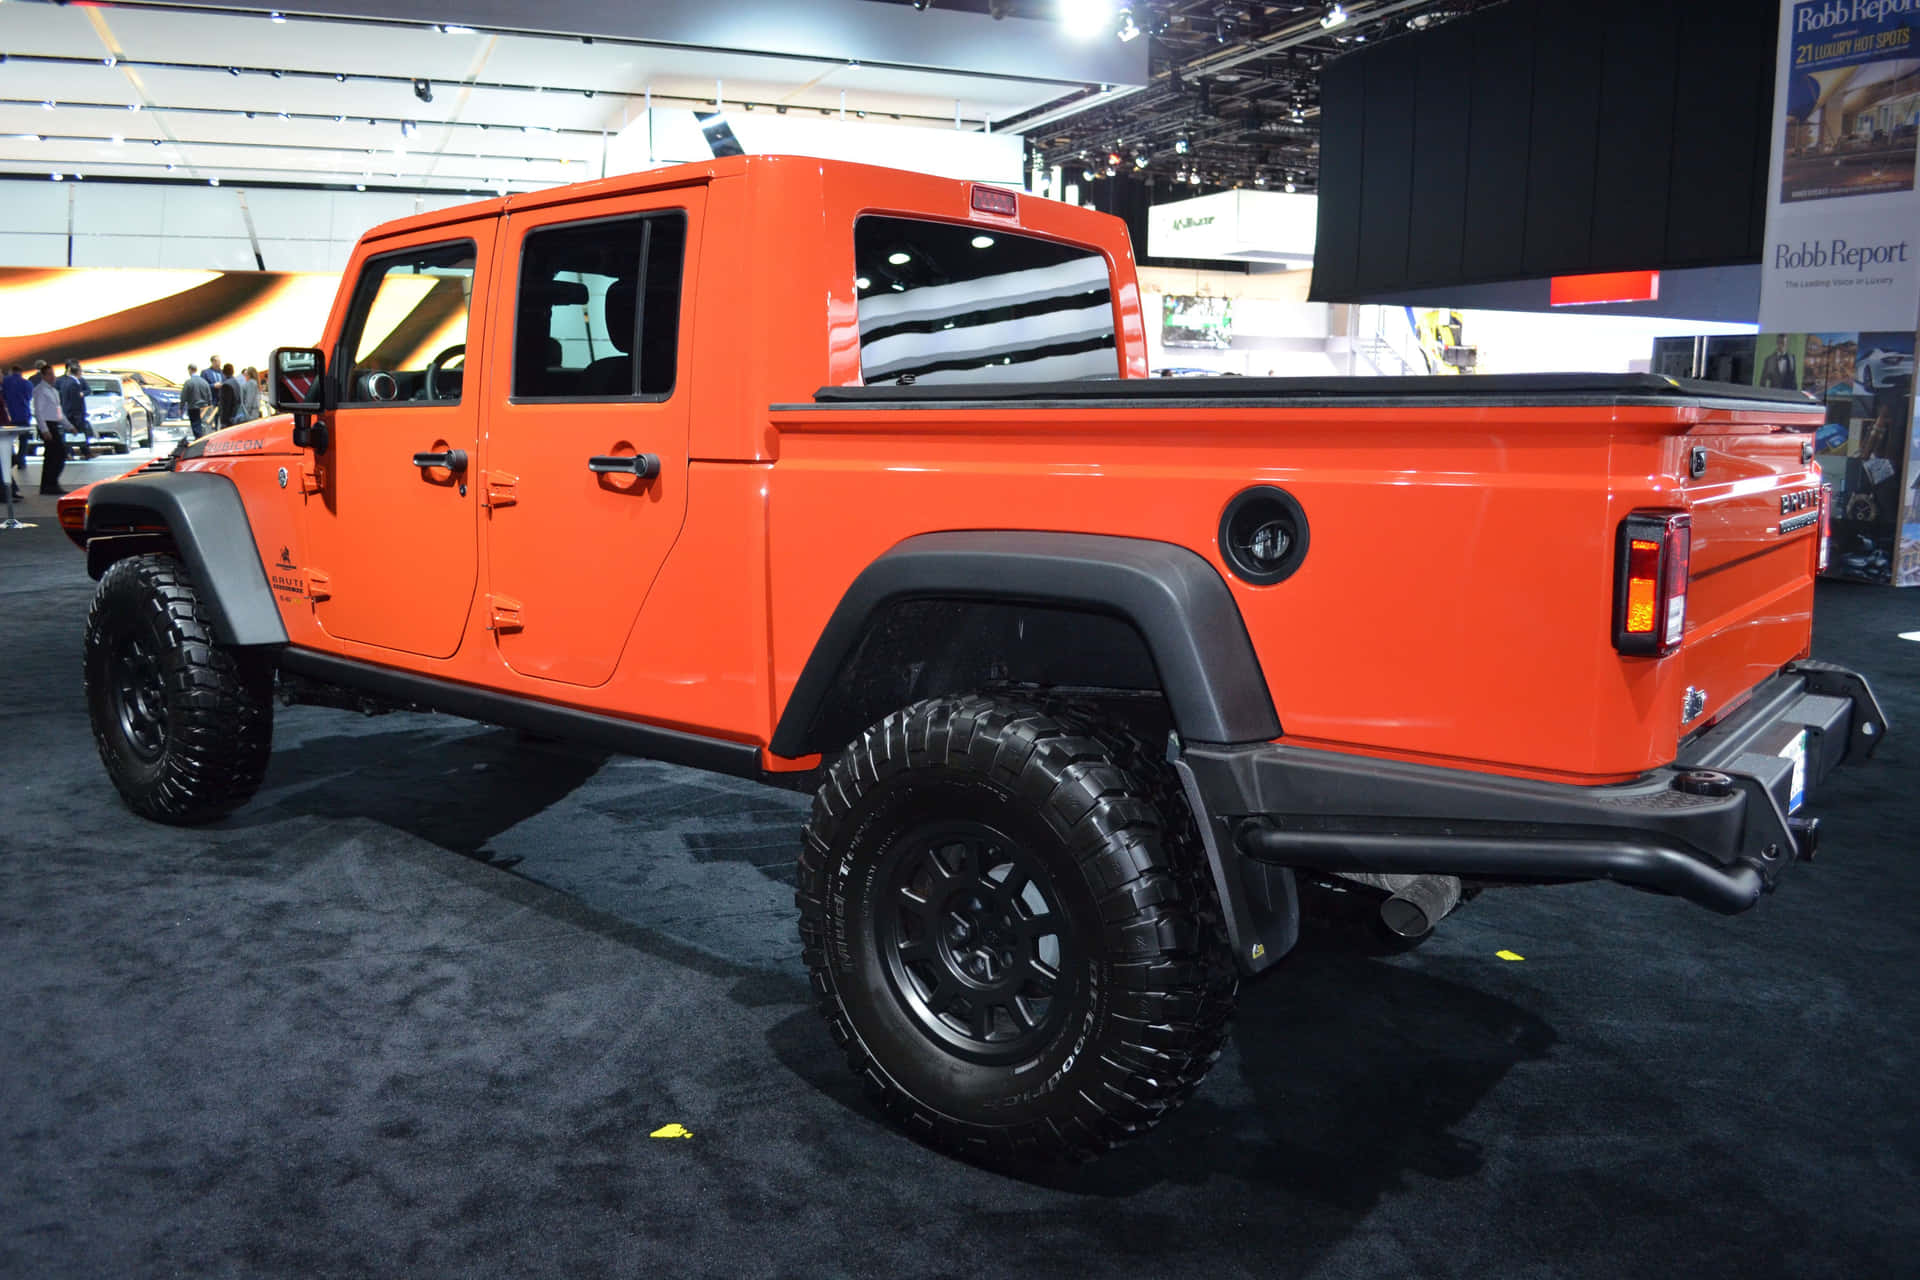 Stunning Jeep Gladiator conquering the outdoor terrain Wallpaper